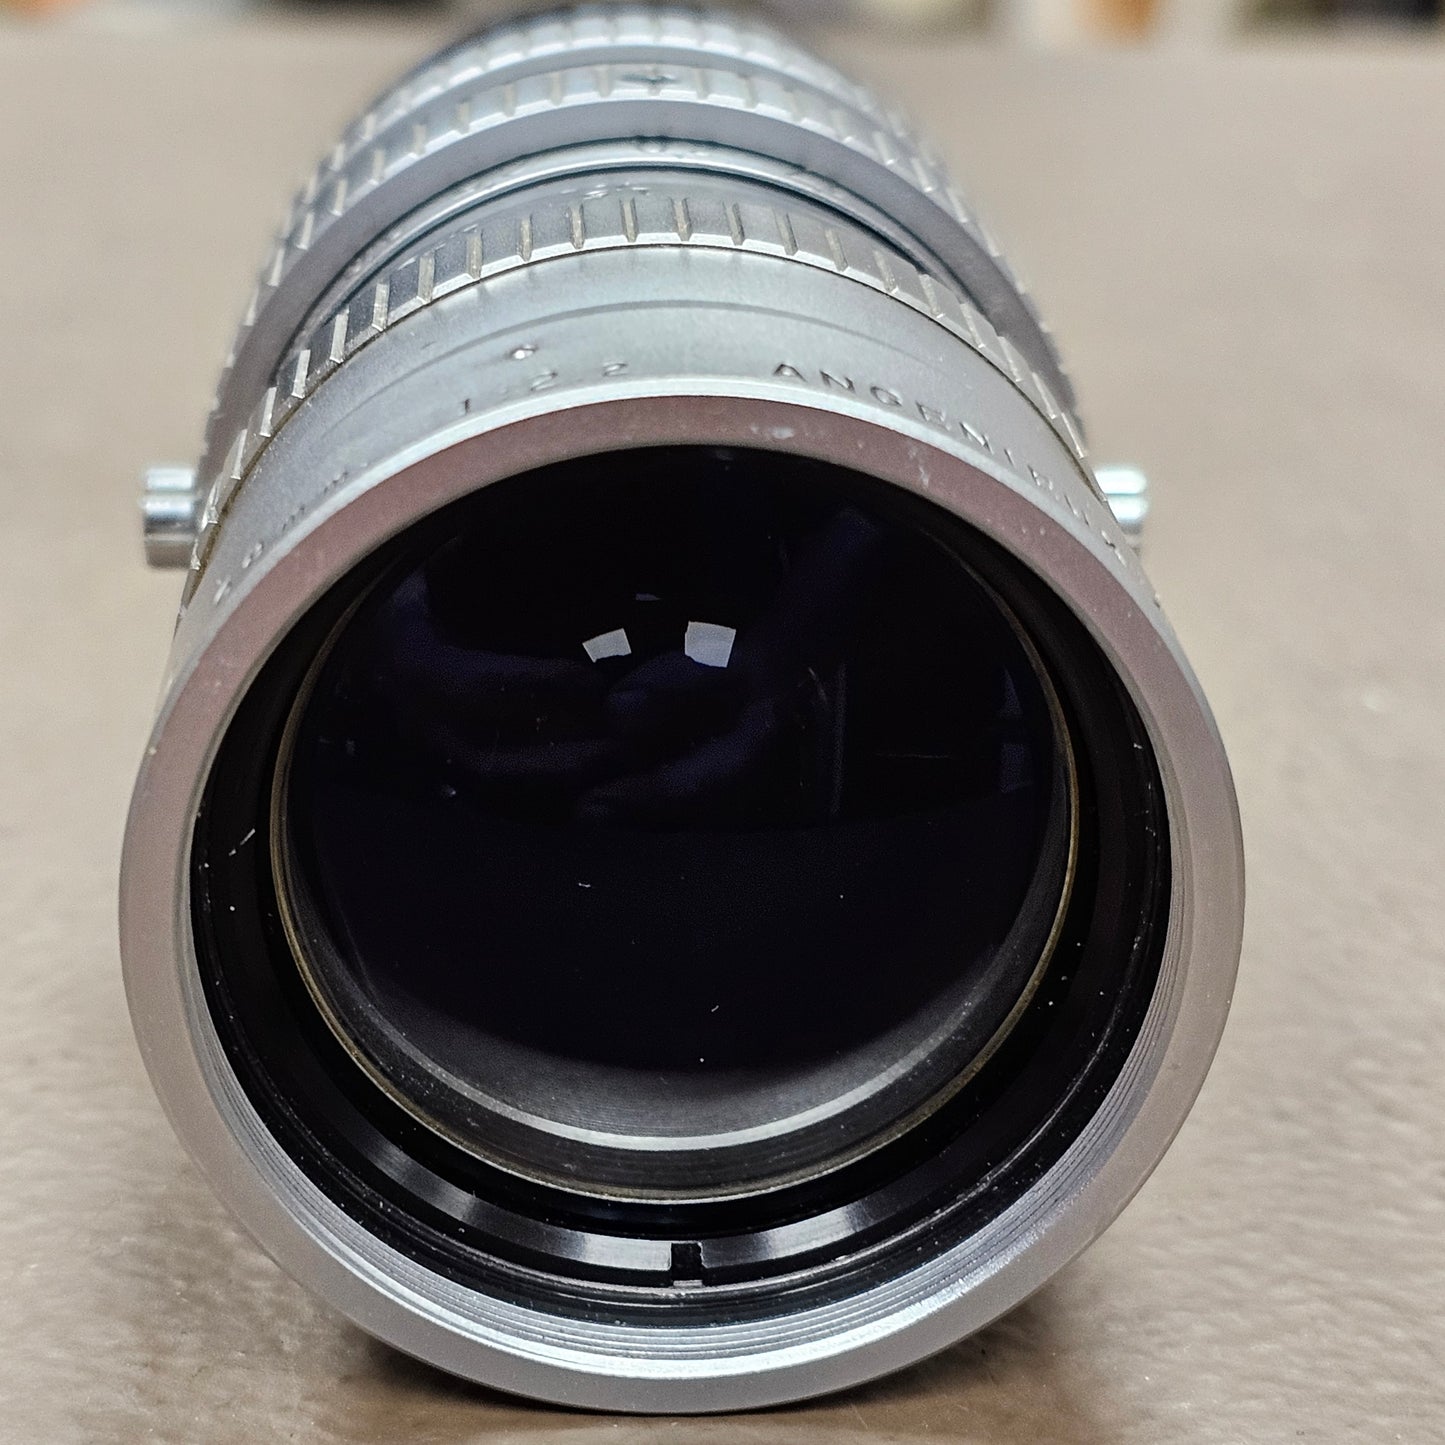 Angenieux 17-68mm f2.2 C-Mount Zoom lens Type L2 (Silver Version) S# 961010